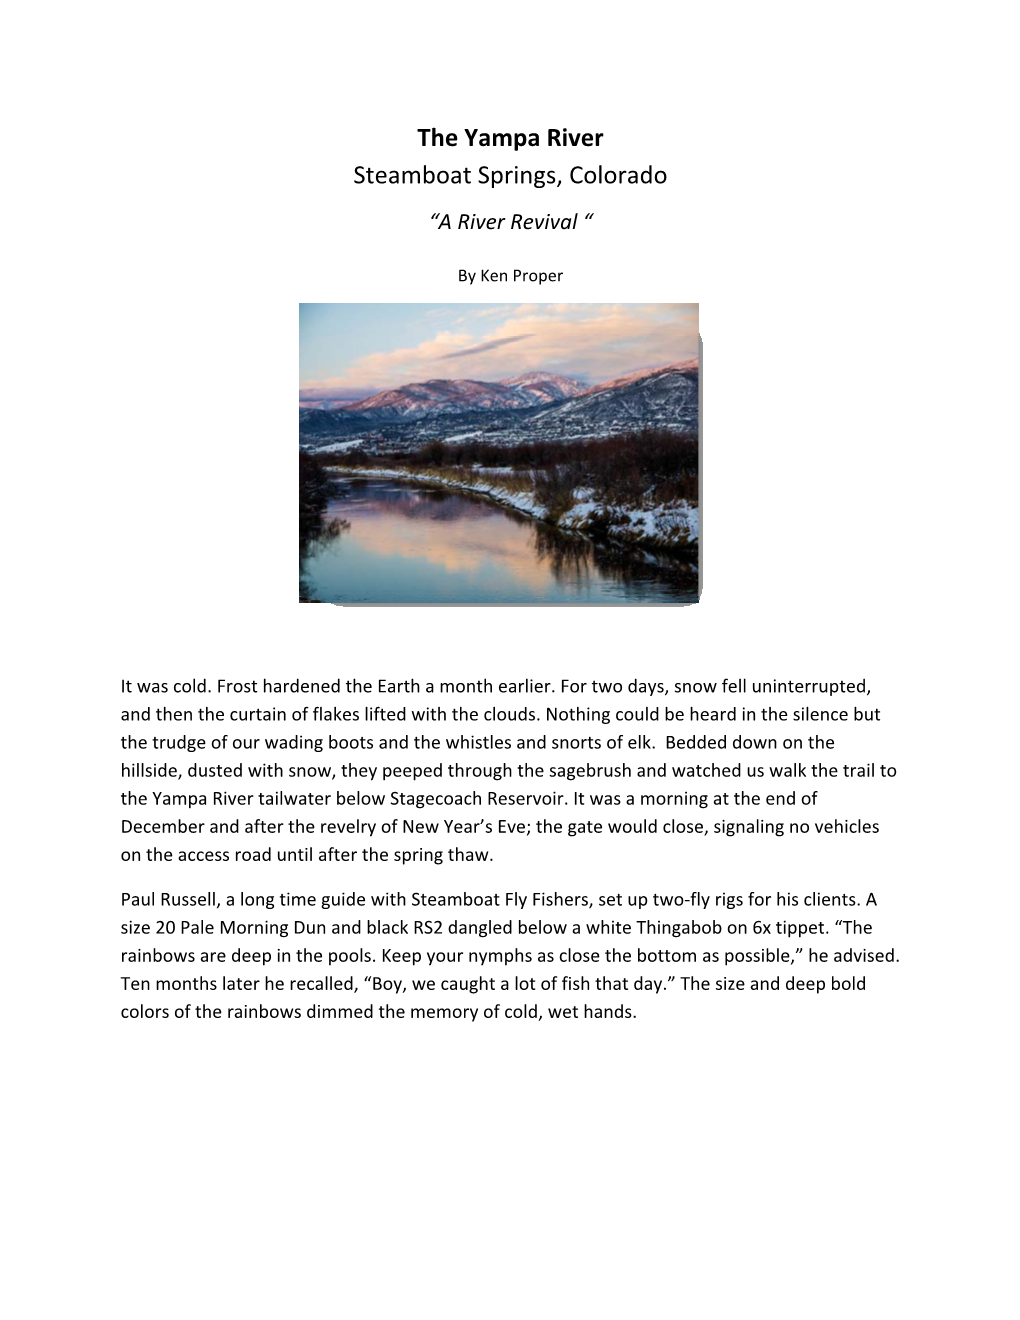 The Yampa River Steamboat Springs, Colorado “A River Revival “